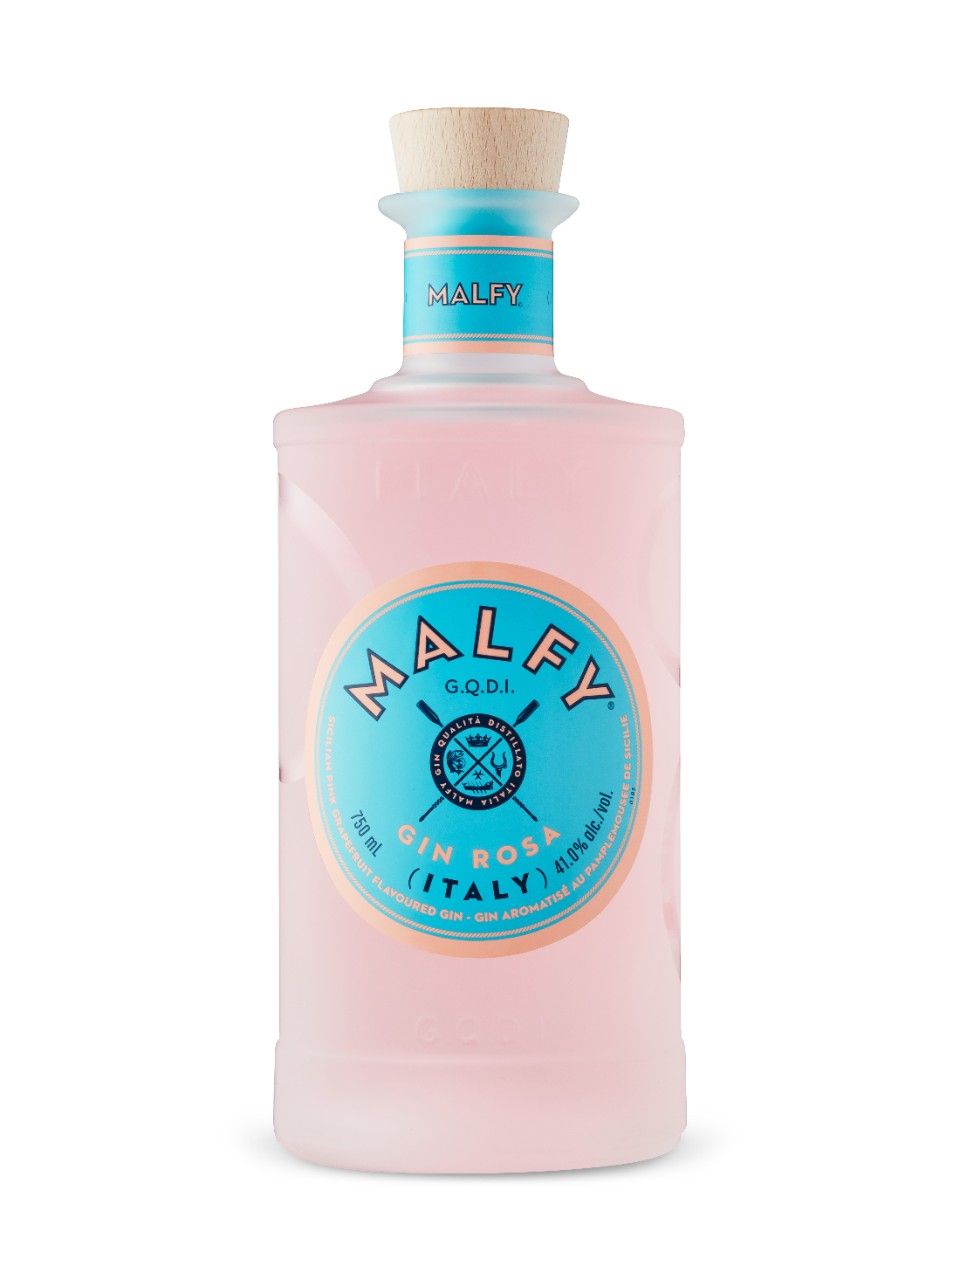 MALFY Gin ROSA 41% 70cl